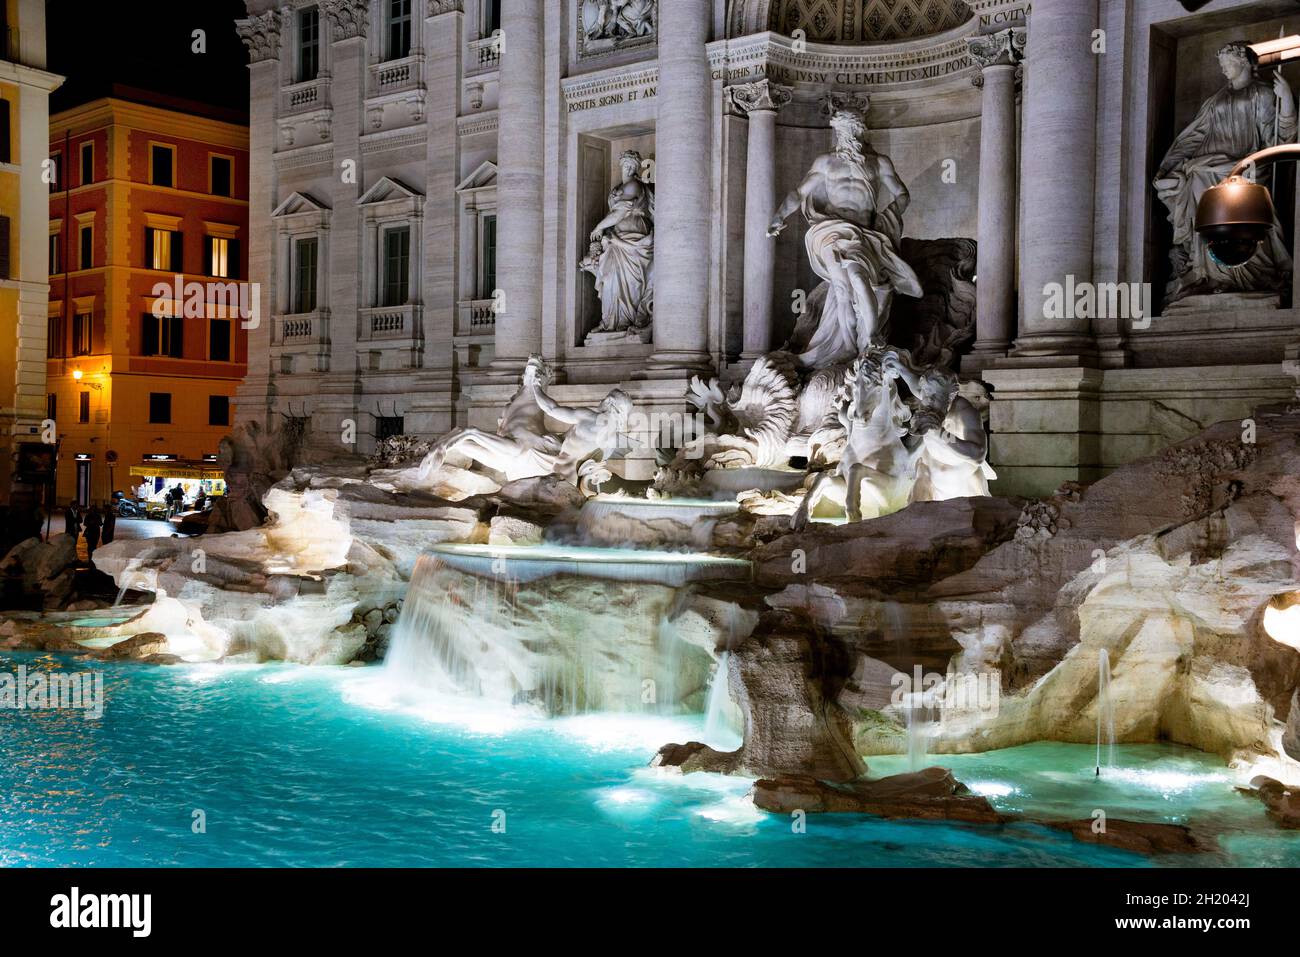 Oceanus on his shell chariot at the Trevi Fountain in Rome, Italy. Stock Photo